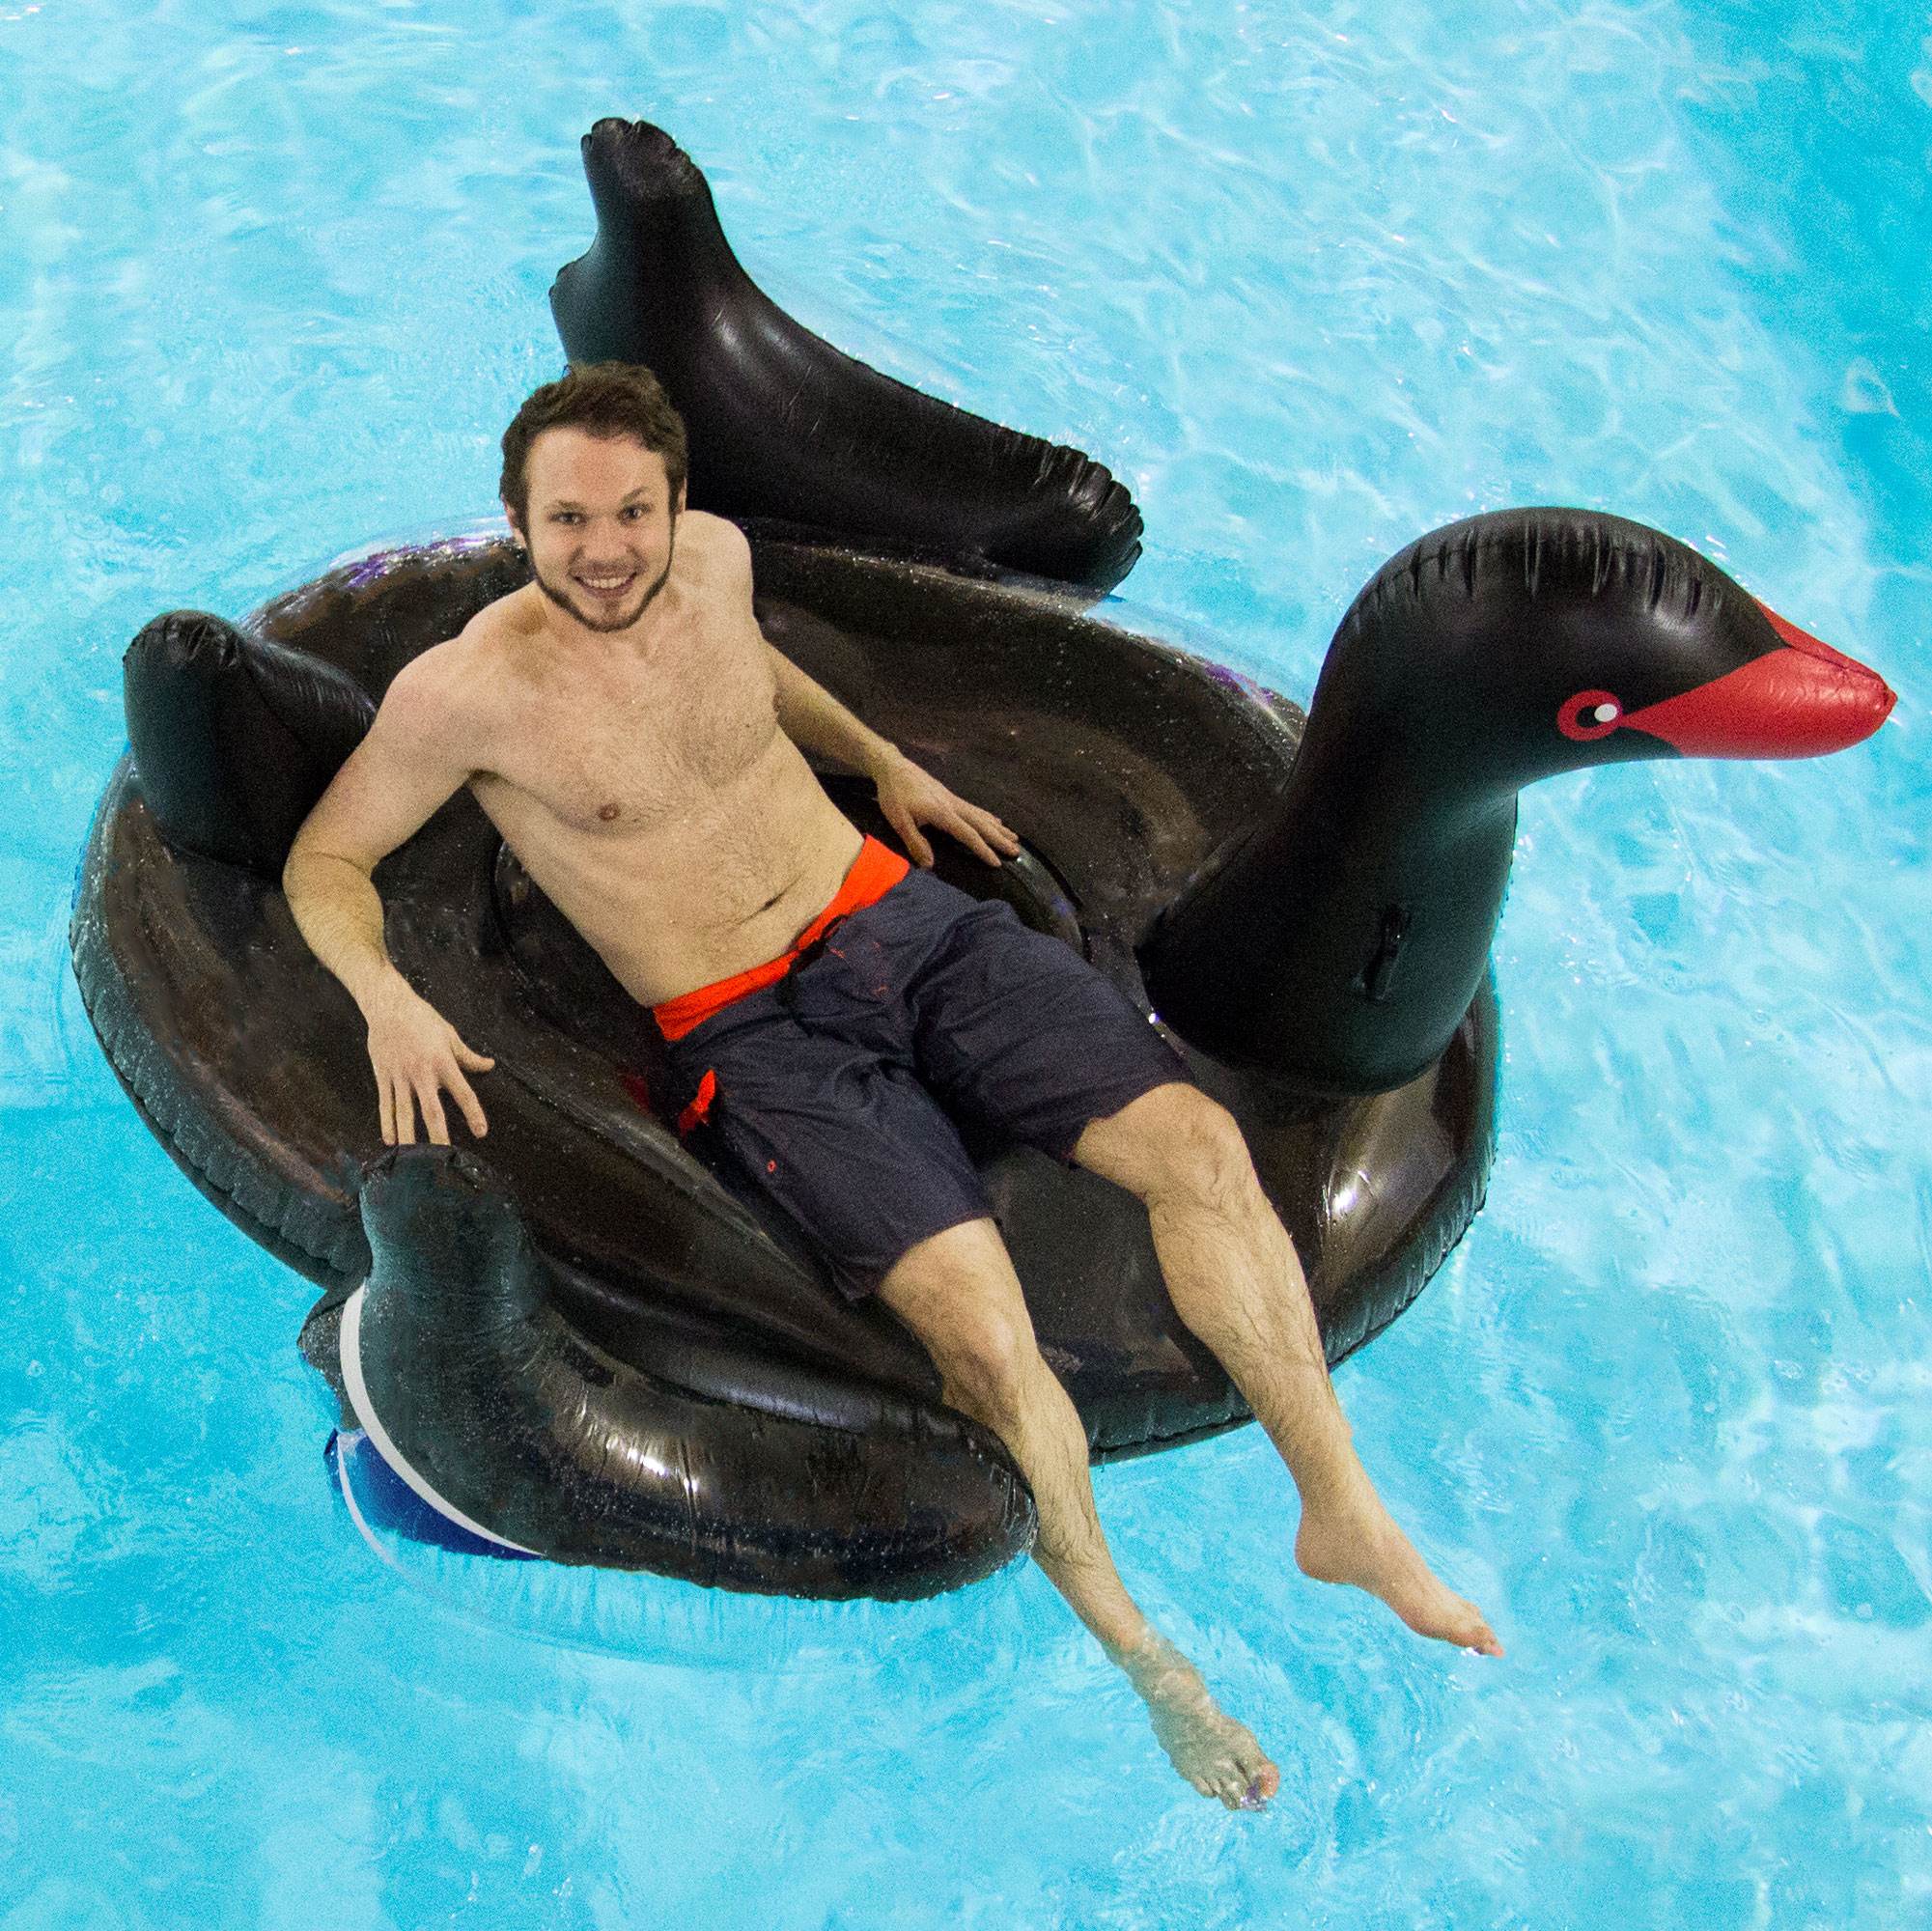 Swimline 90628 Giant Inflatable Ride On 75 Inch Opaque Black Swan Pool Float 